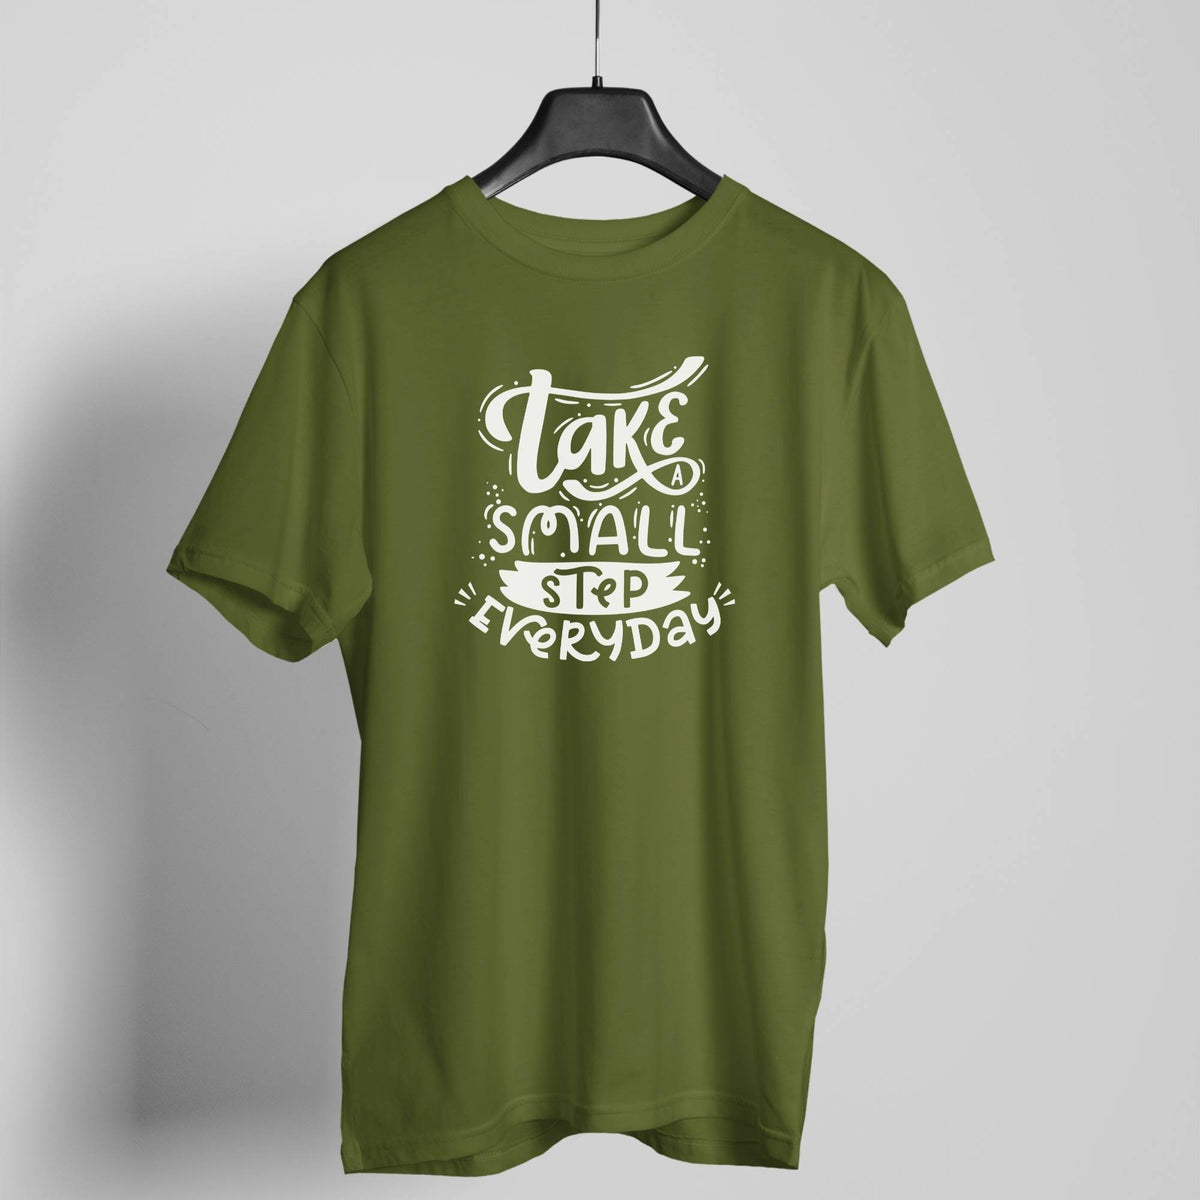 Take small step everyday olive green t-shirt